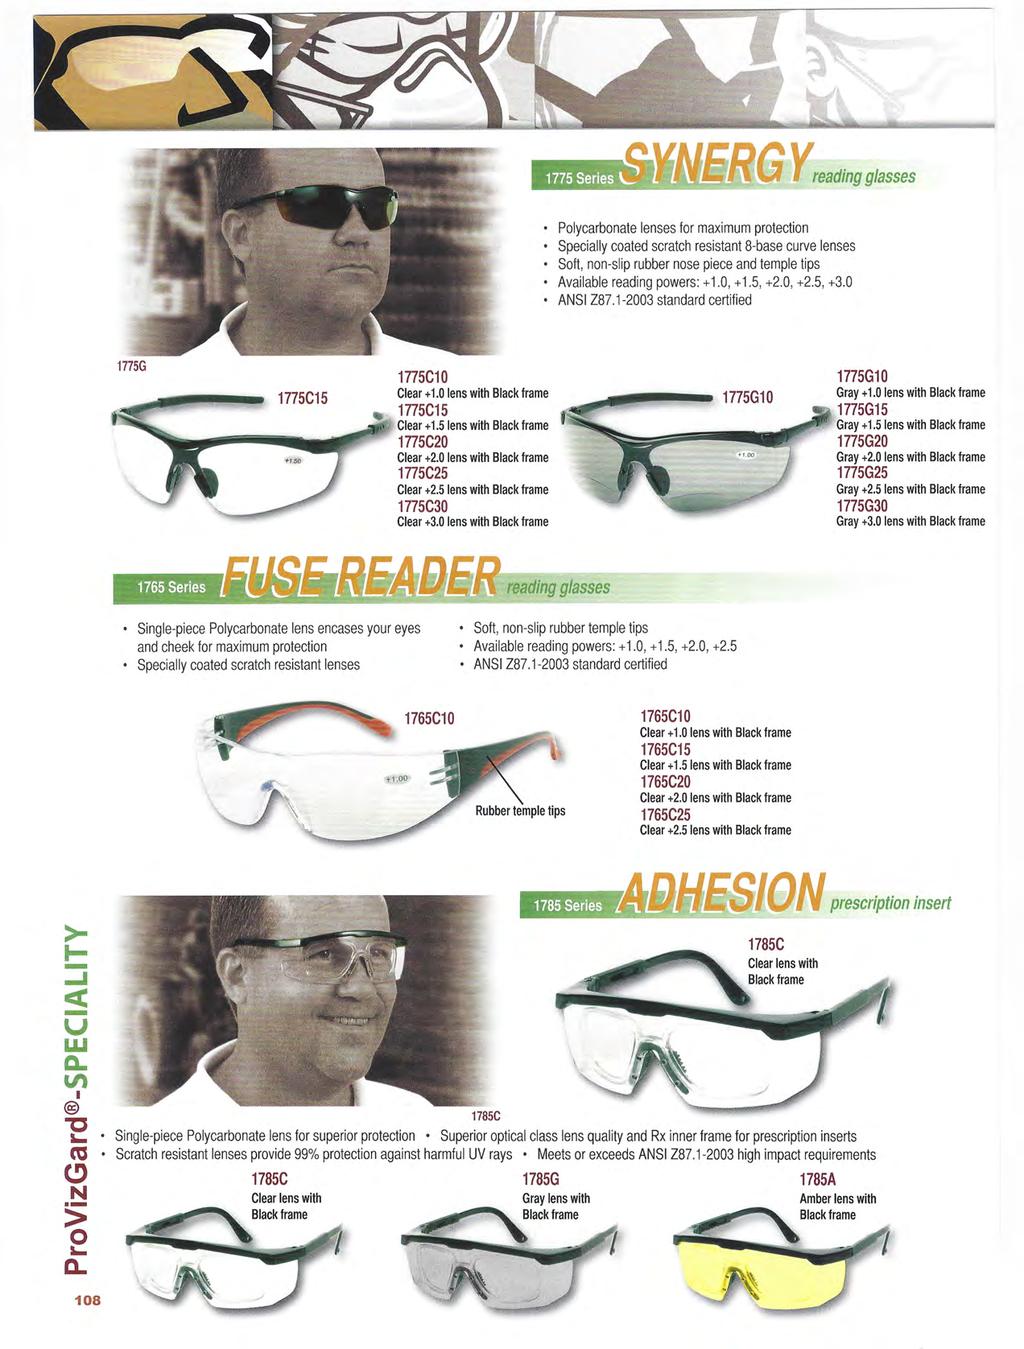 1775 Series Polycarbonate lenses tor maximum protection Specially coated scratch resistant 8-base curve lenses Solt, non-slip rubber nose piece and temple tips Available reading powers: + 1., + 1.